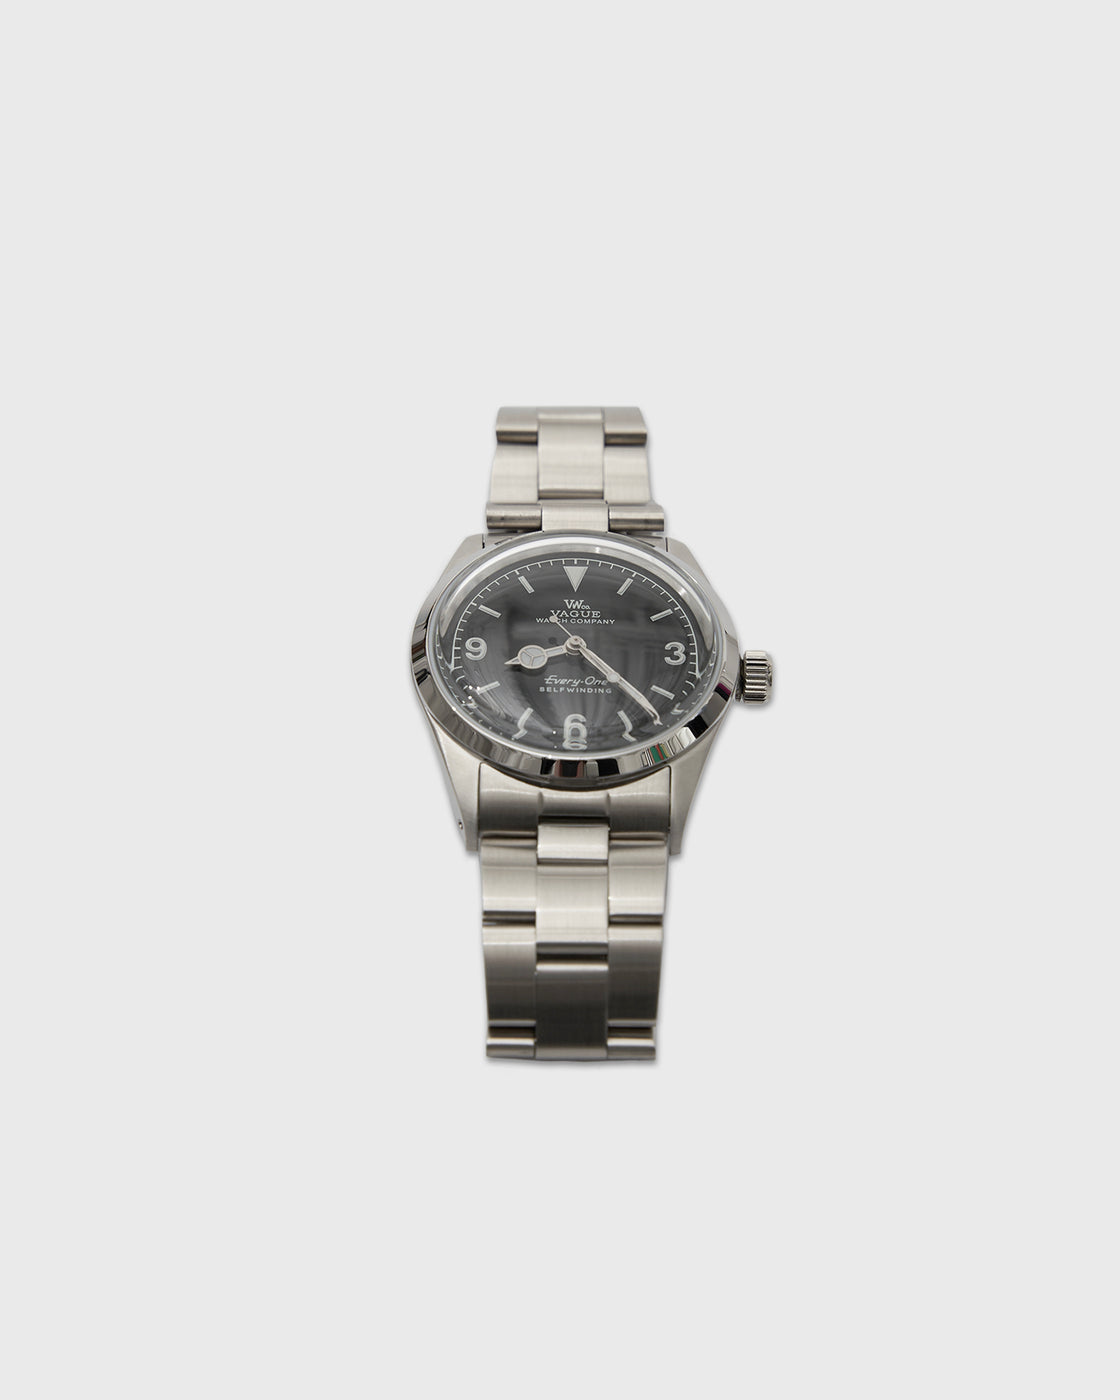 VAGUE WATCH CO. Every-One, Black